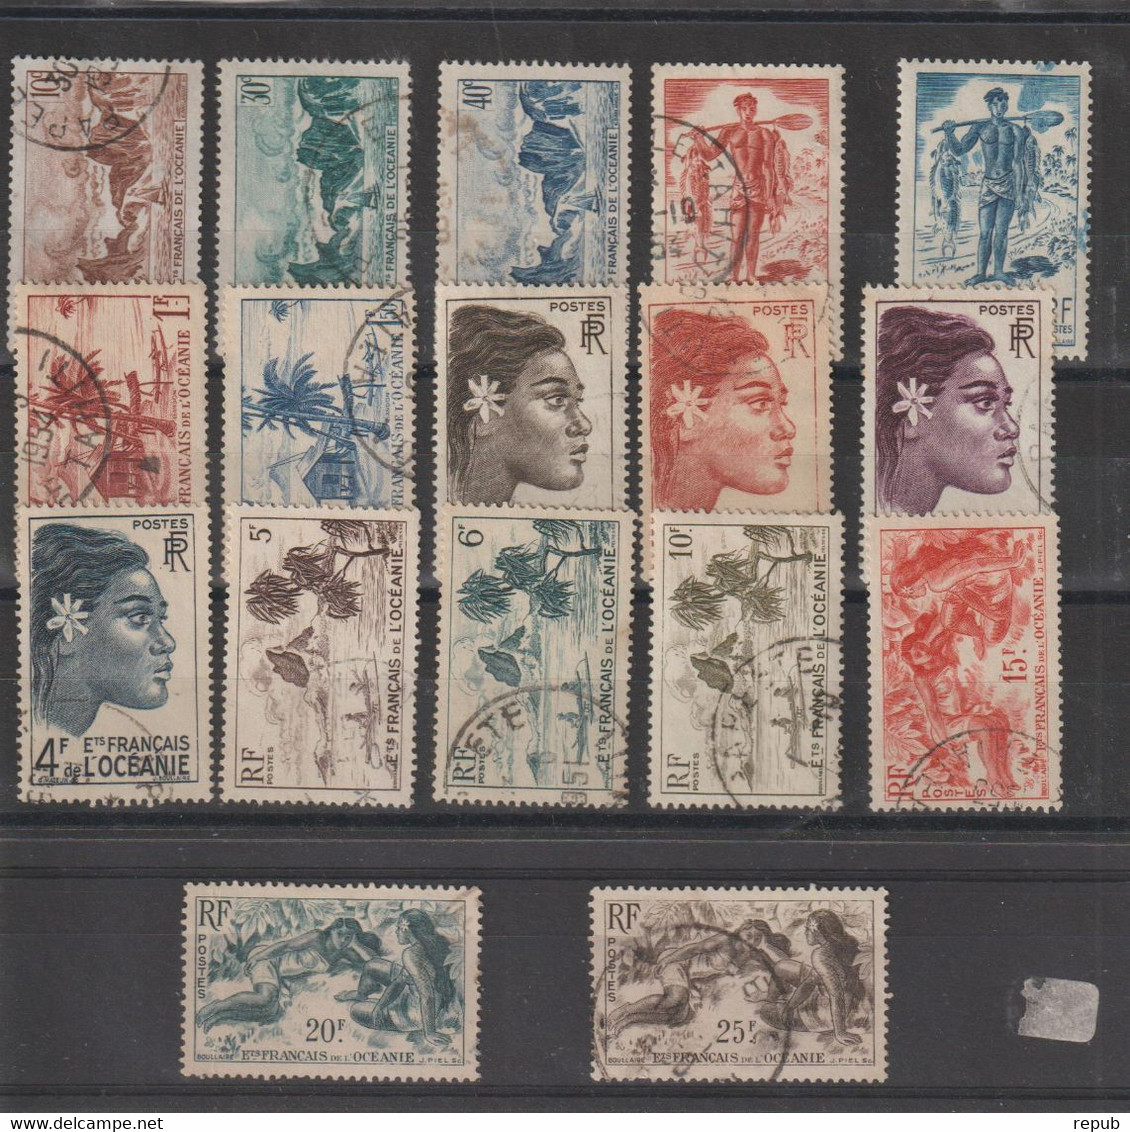 Océanie 1948 Série Courante 182-200 Sauf 186 Et 189, 17 Val Oblit Used - Used Stamps